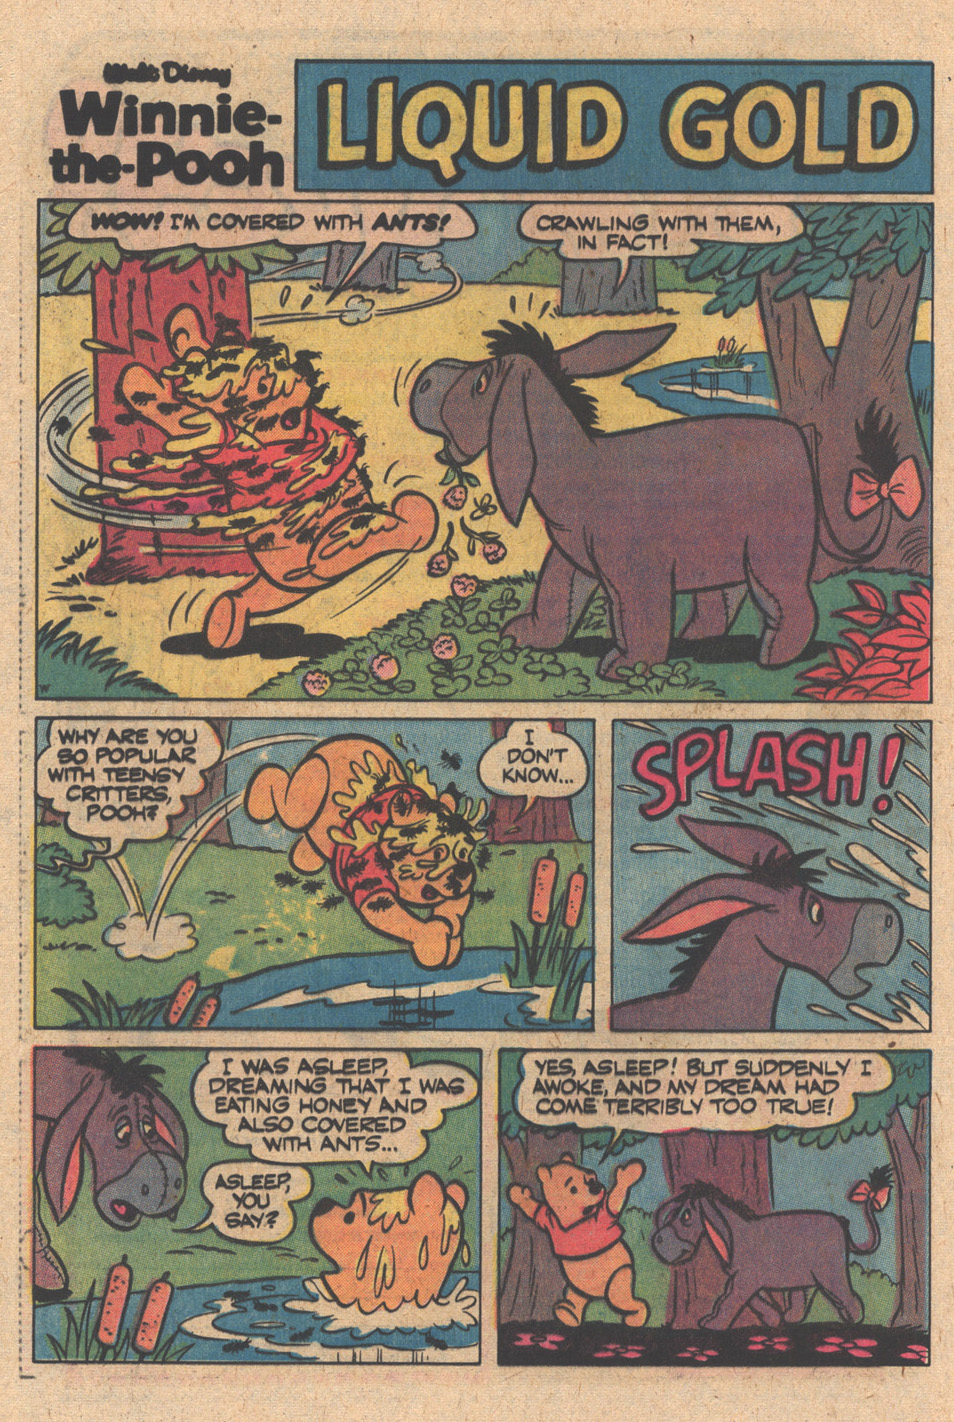 Read online Winnie-the-Pooh comic -  Issue #6 - 24